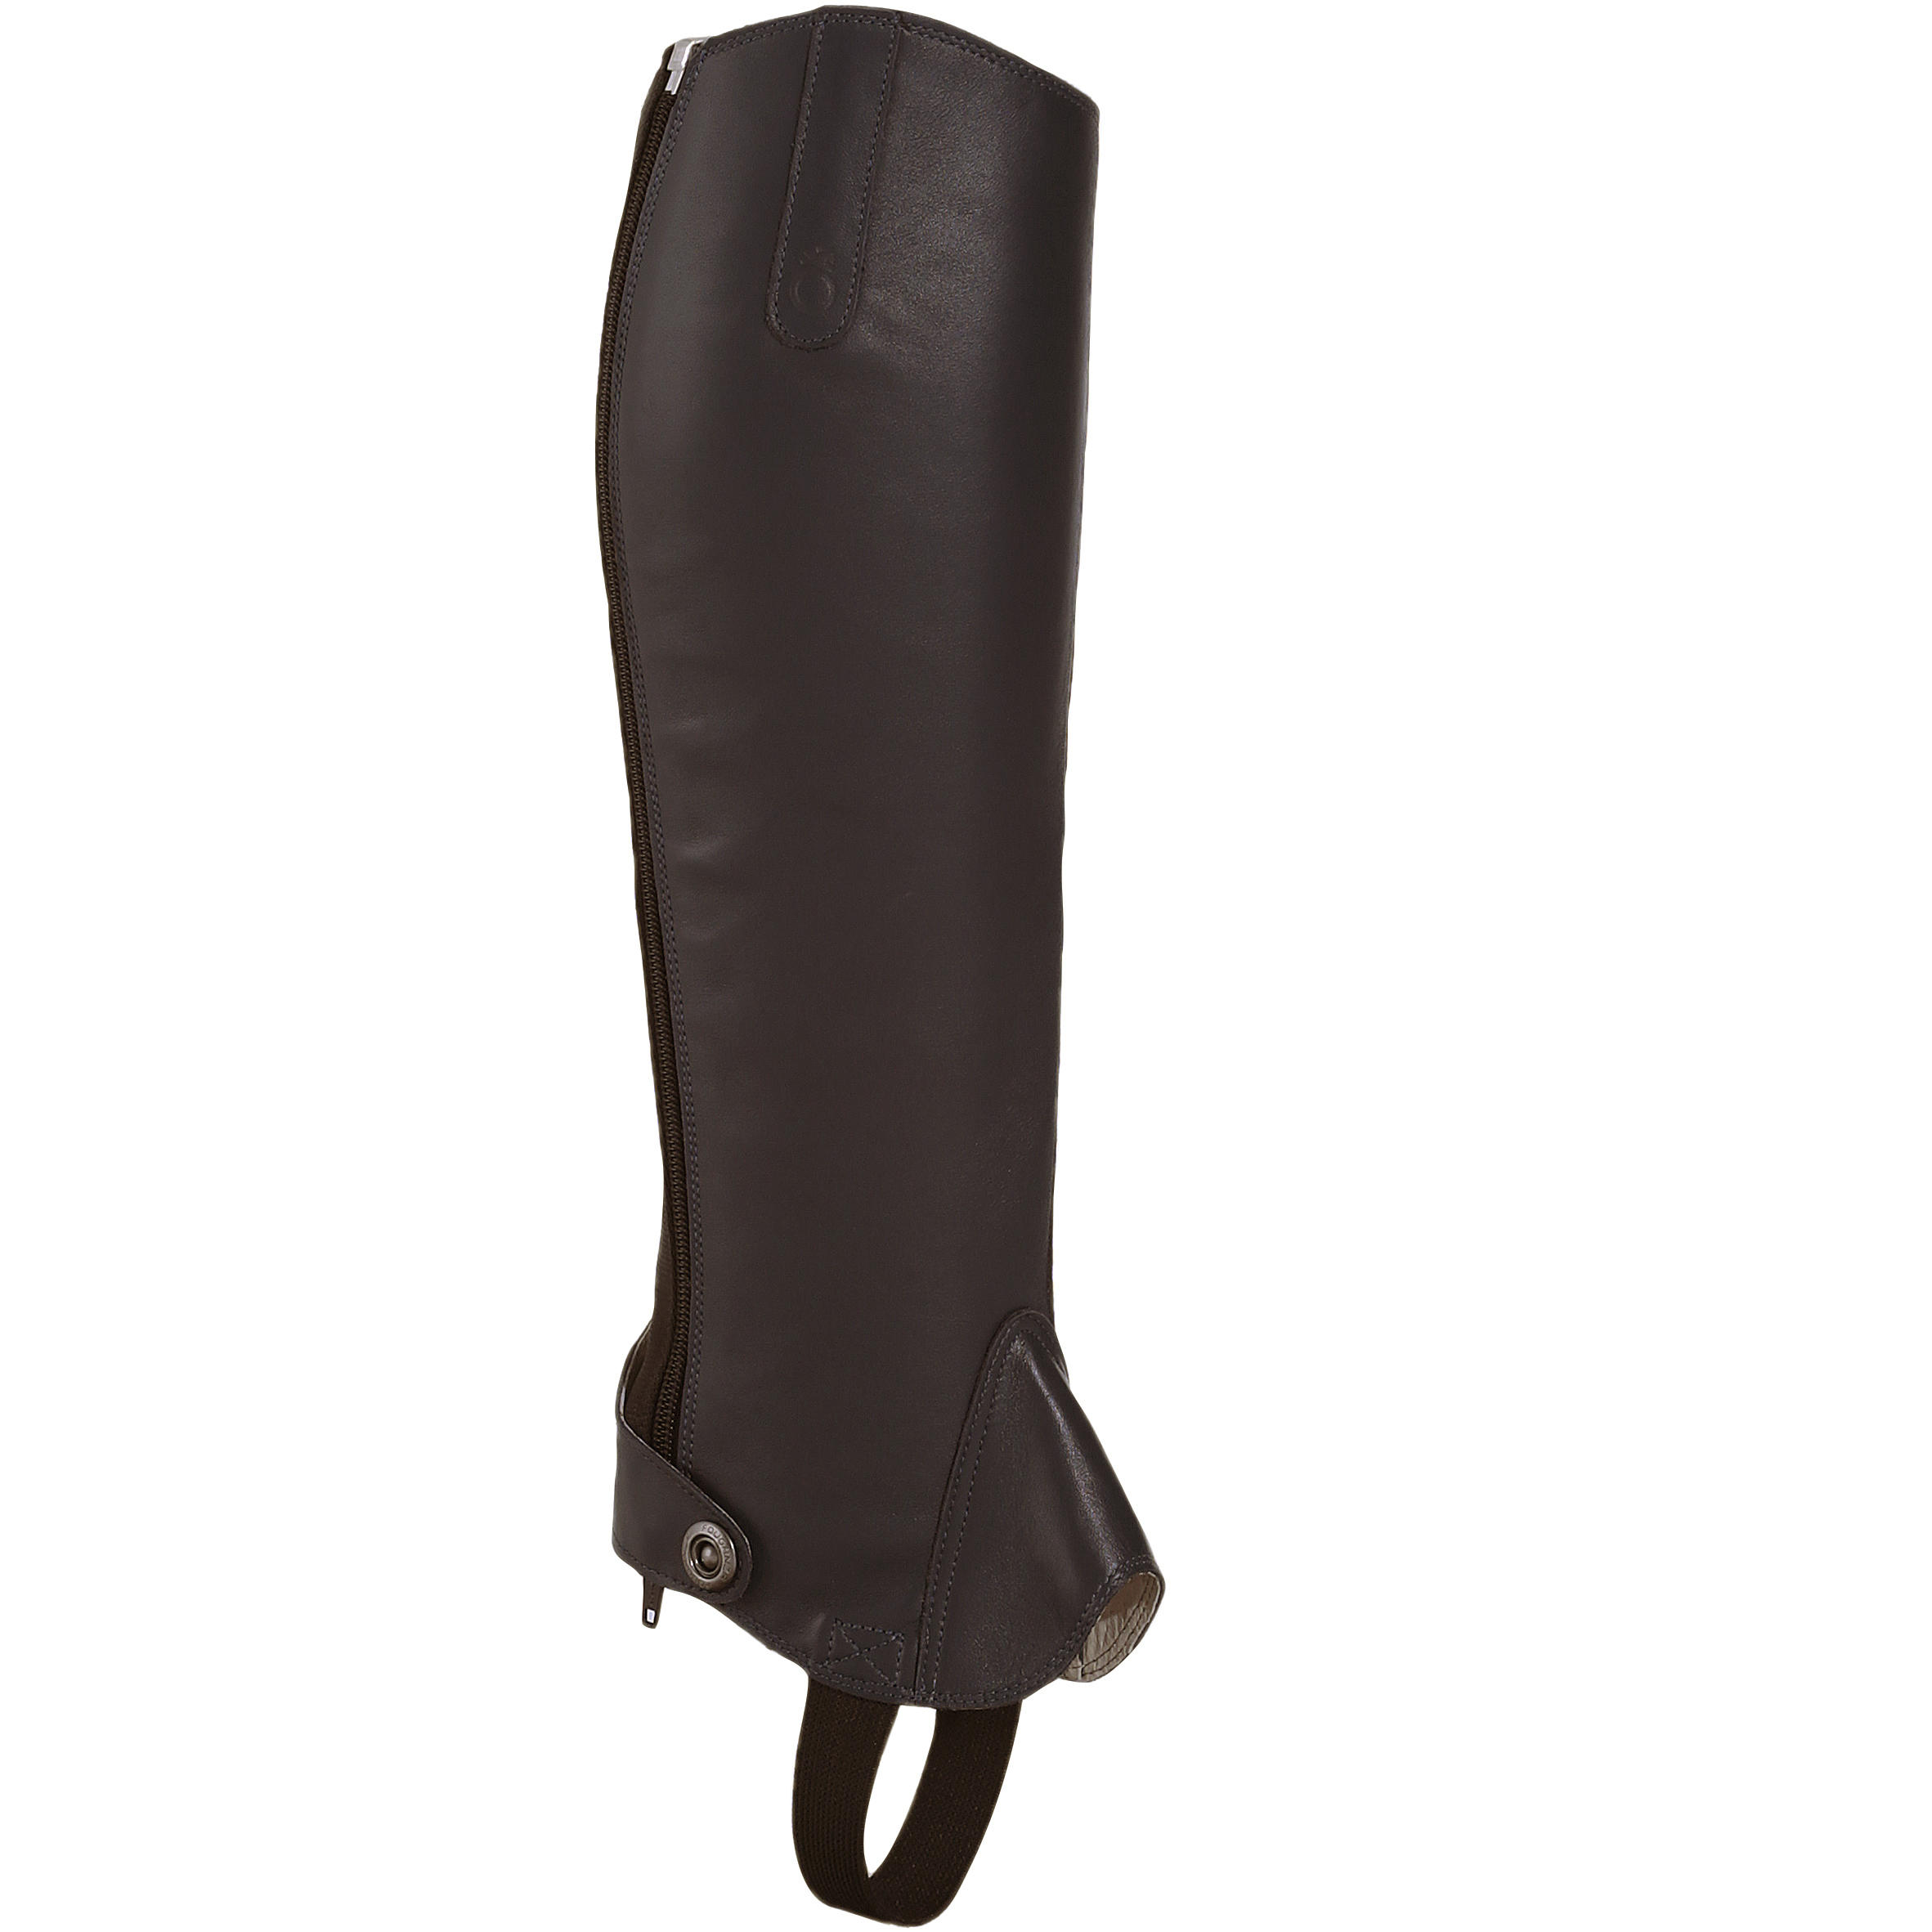 FOUGANZA Paddock 700 Adult Horse Riding Leather Half Chaps - Brown